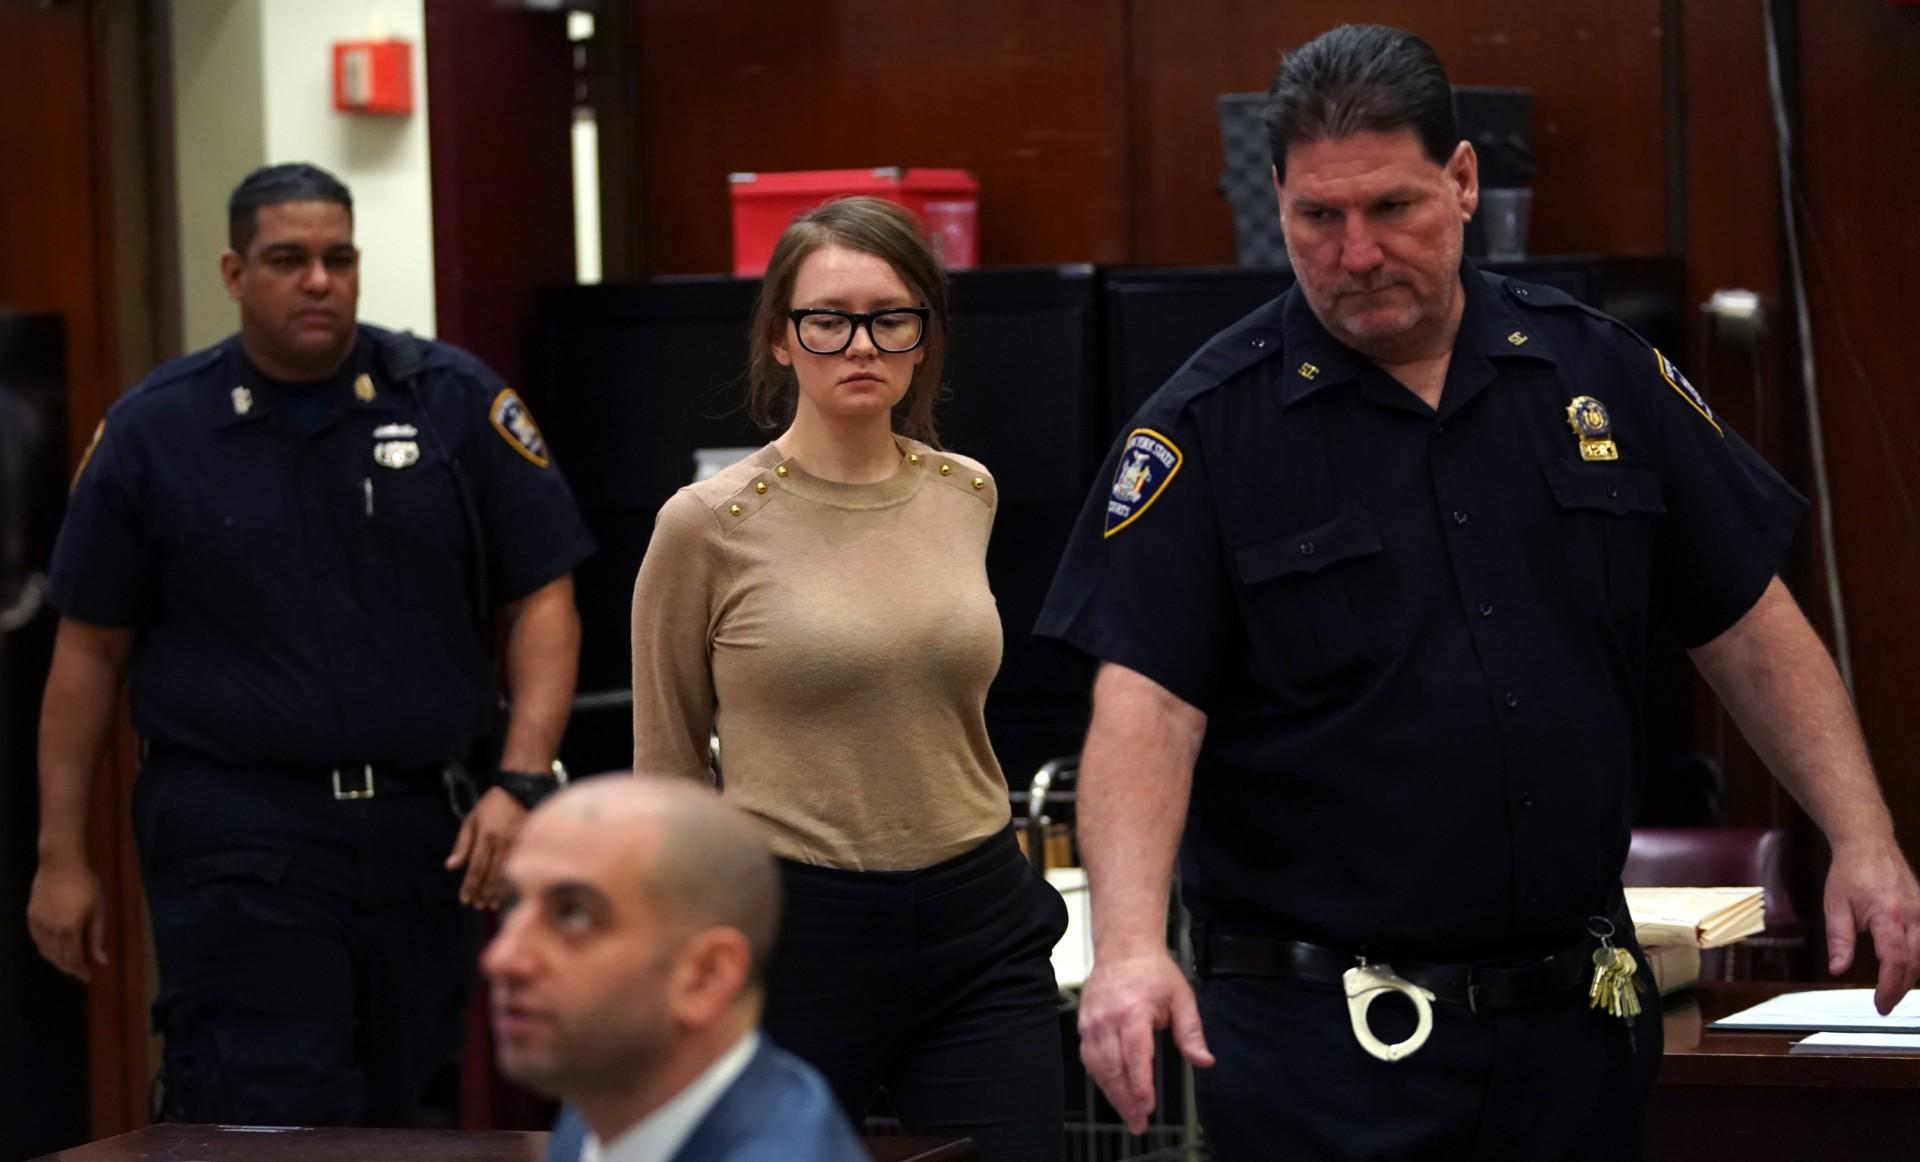 Anna Sorokin, better known as Anna Delvey, is seen in the courtroom during her trial at New York State Supreme Court in New York on April 11, 2019. Photo: AFP